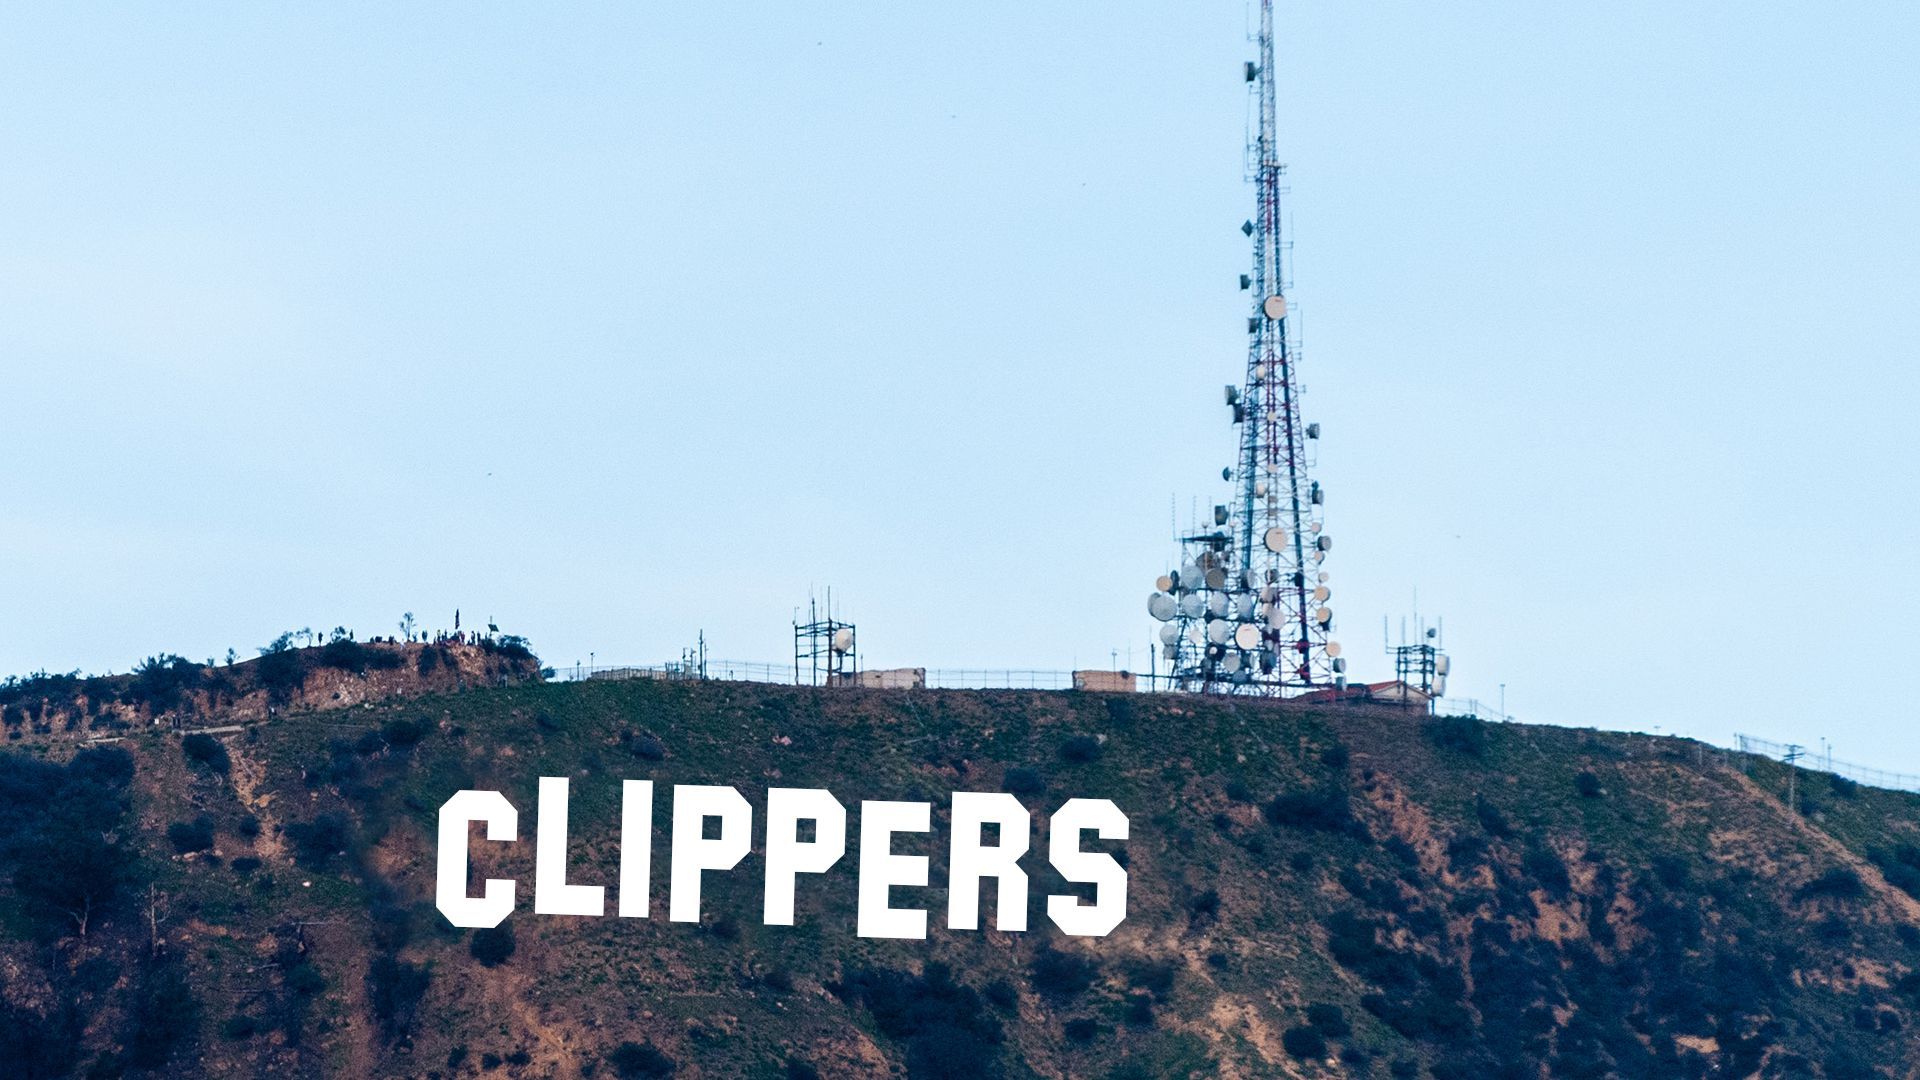 Hollywood sign replaced with "Clippers"